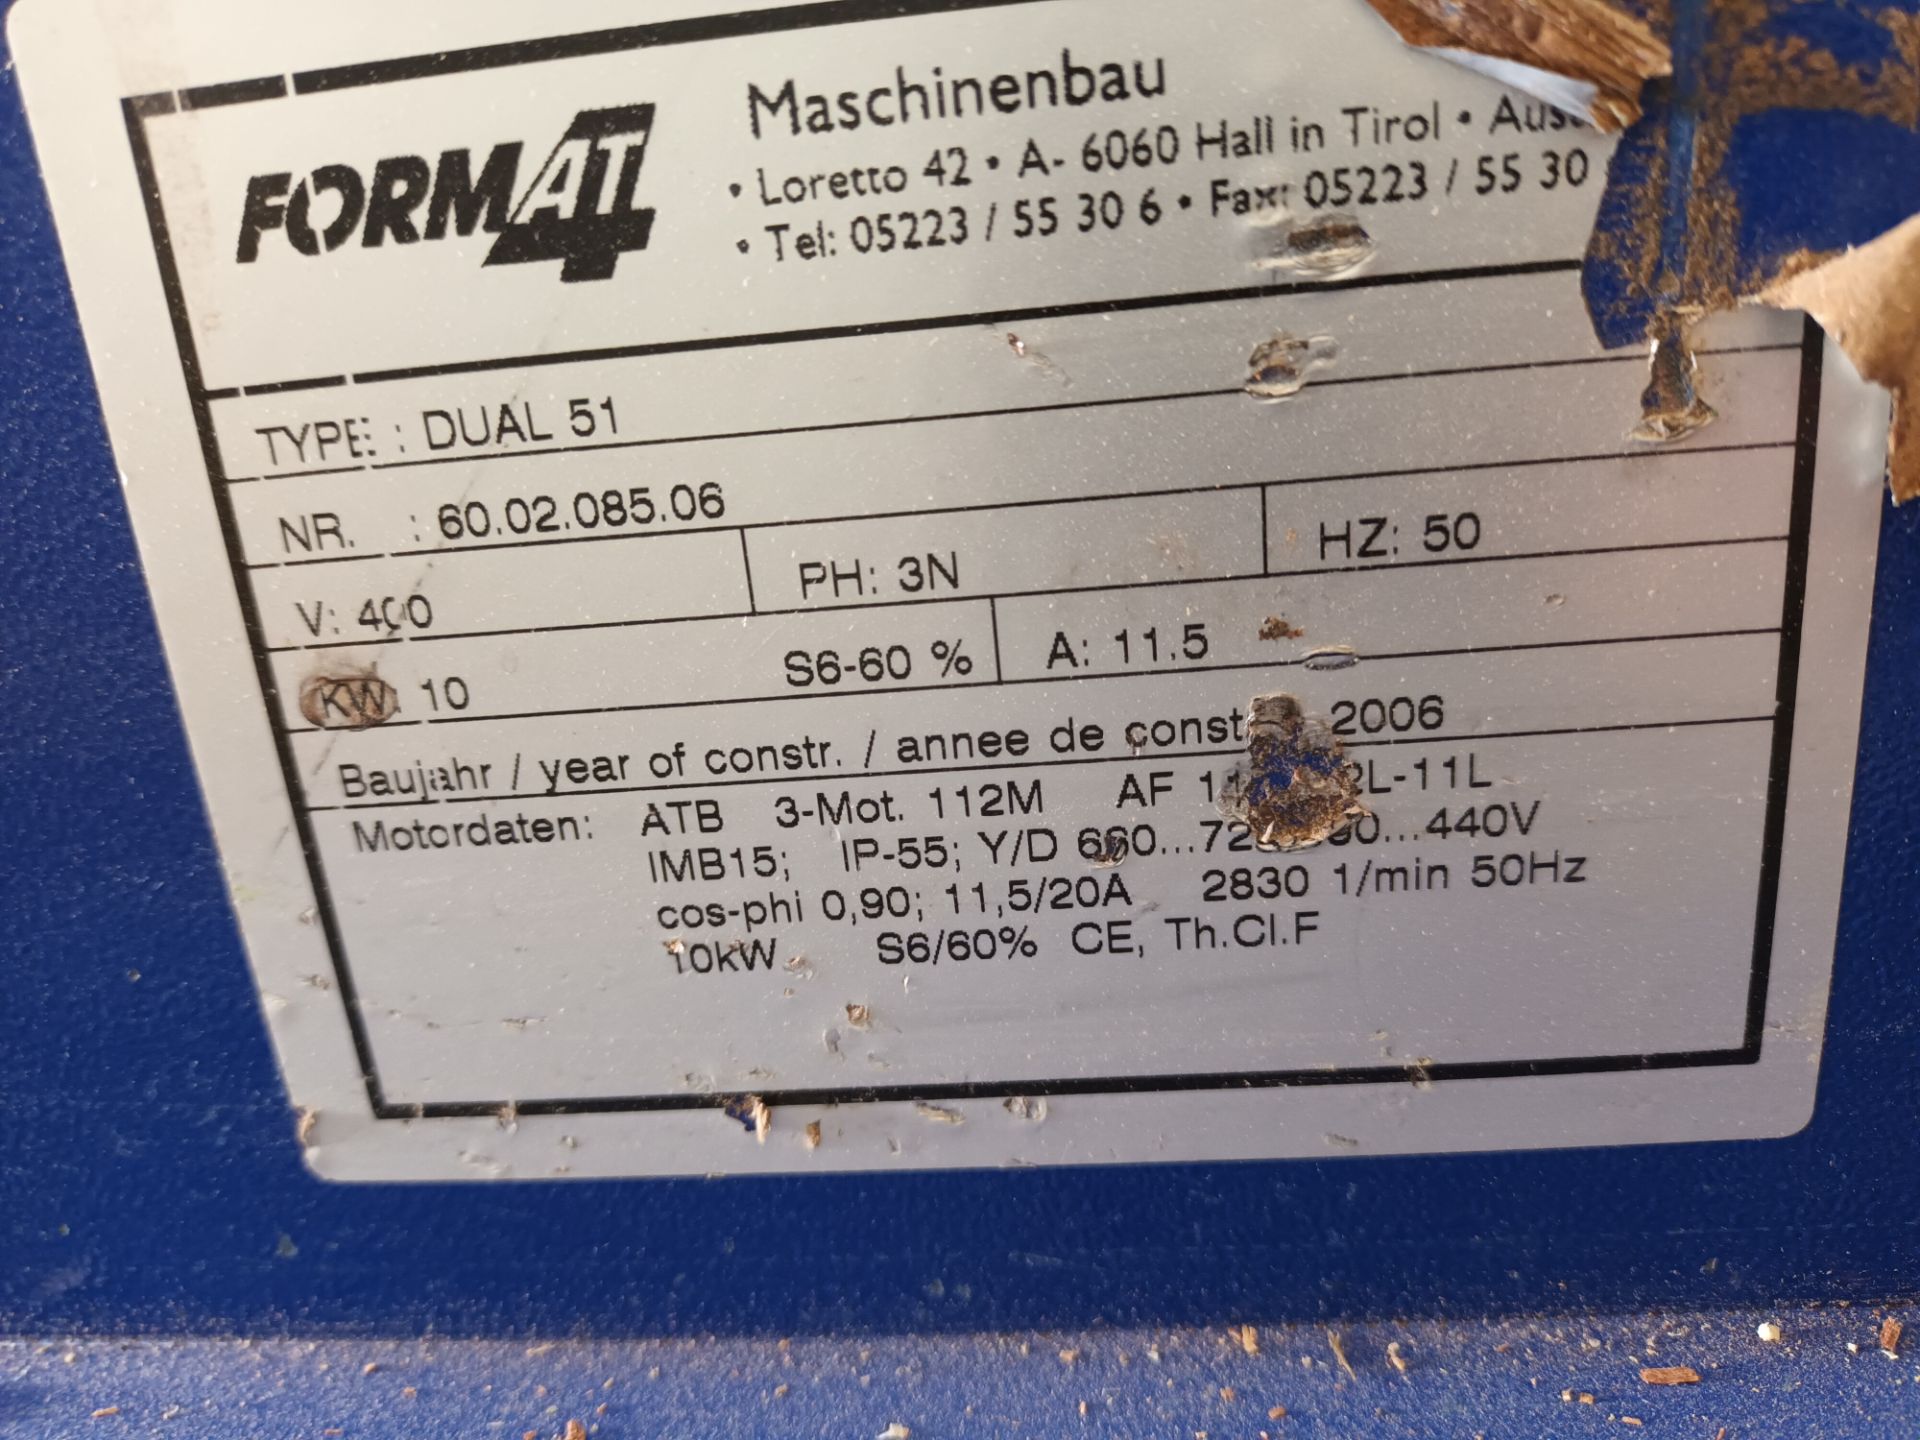 Format dual 51 planer/thicknesser (2006) NB: this item has no CE marking. The Purchaser is - Image 2 of 3